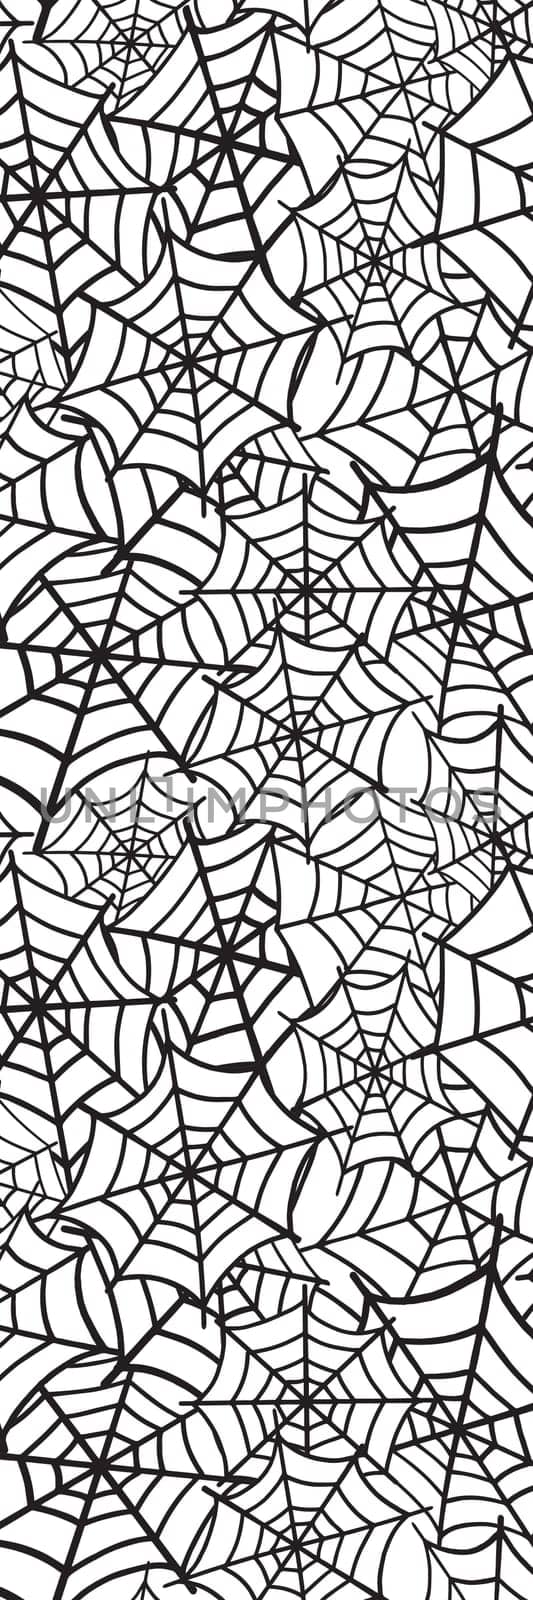 Halloween Black and White bookmark with spider web pattern